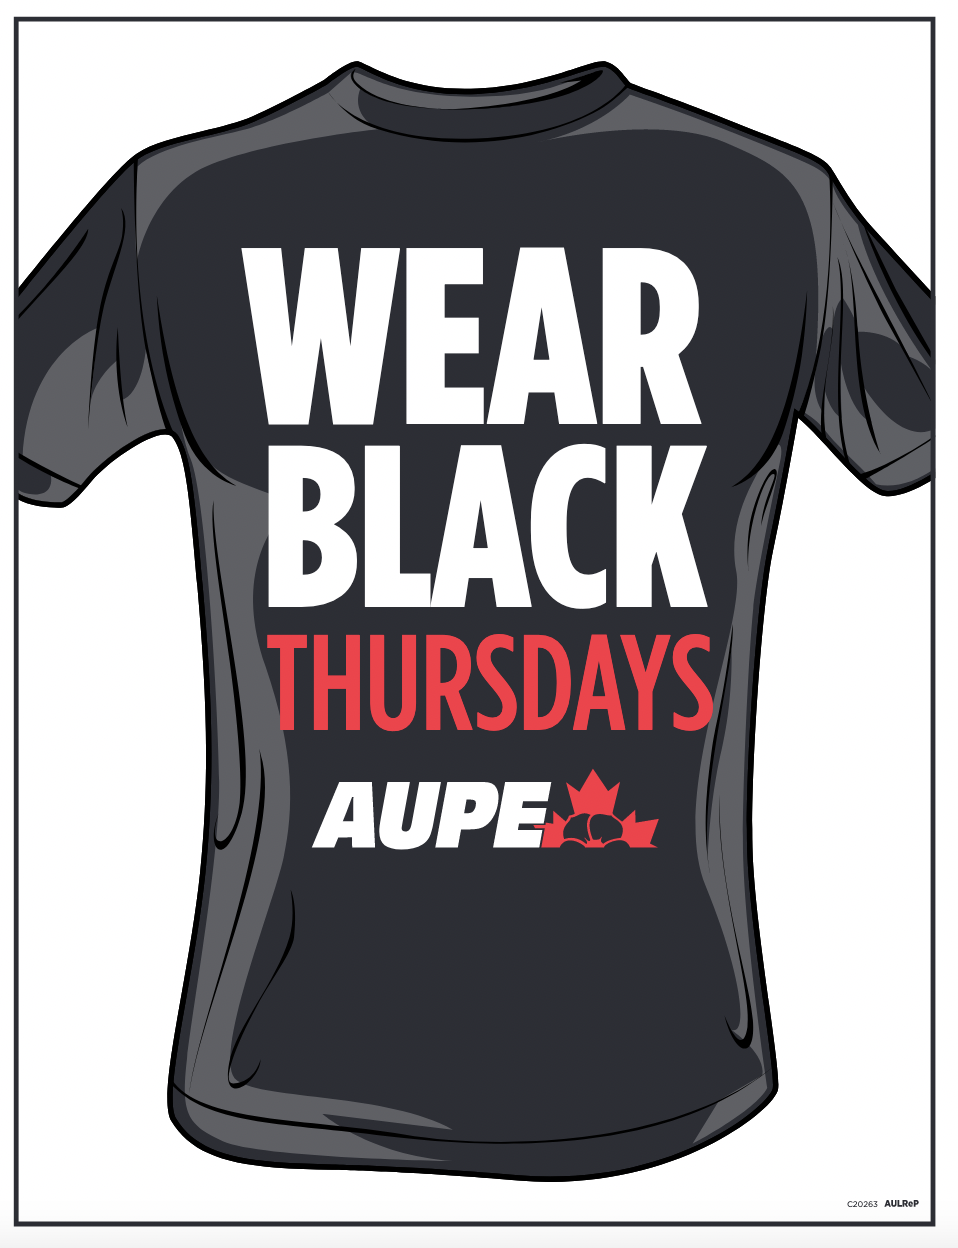 Illustration of a black t-shirt with a message printed on it. The message reads Wear Black Thursdays with the Alberta Union of Provincial Employees logo.